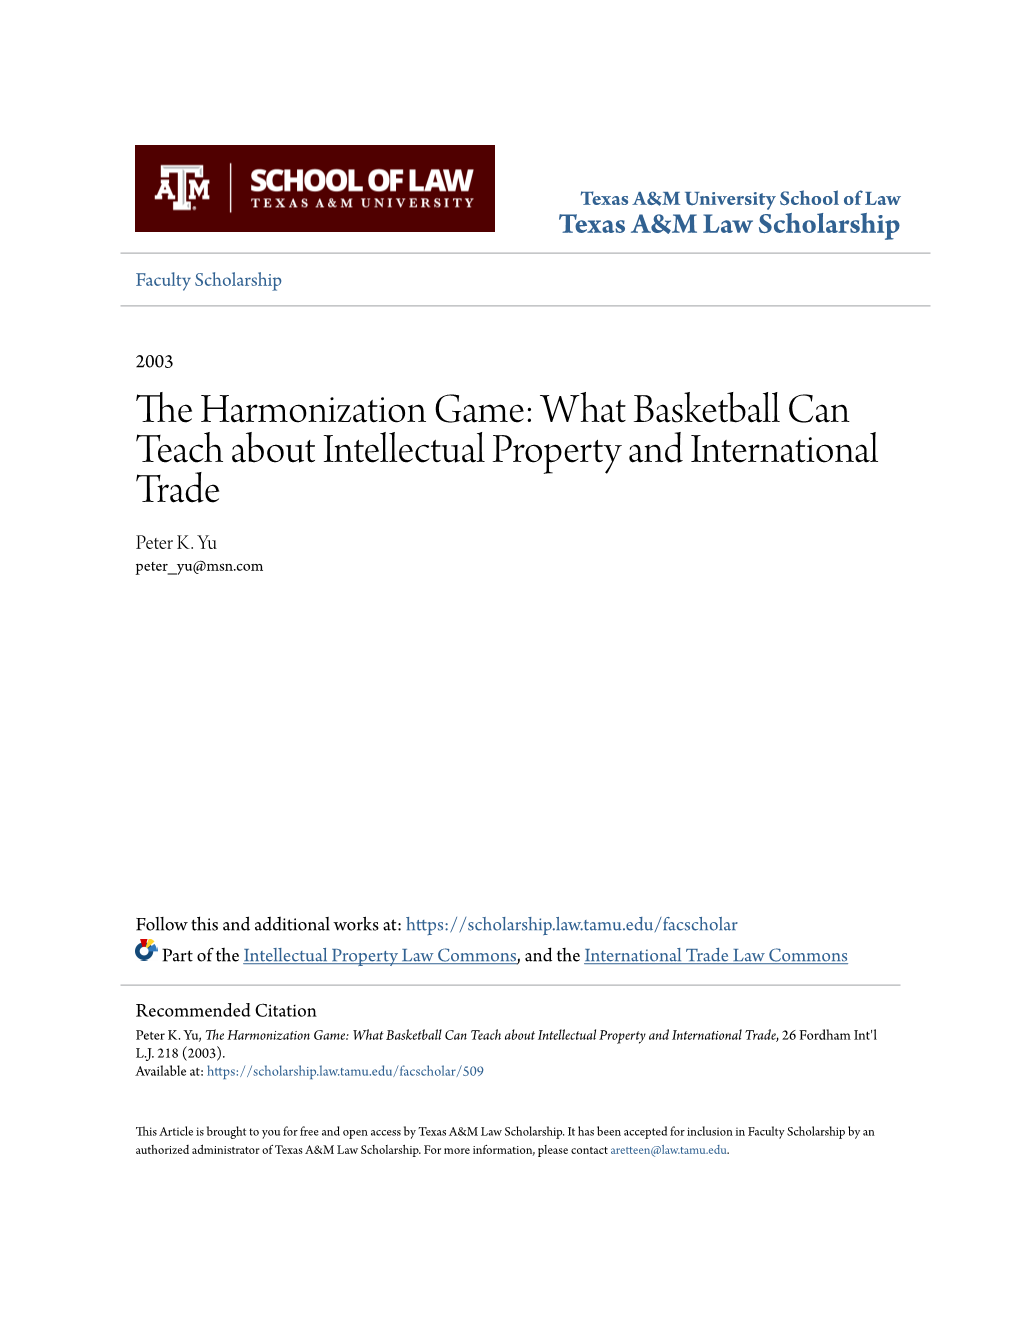 The Harmonization Game: What Basketball Can Teach About Intellectual Property and International Trade, 26 Fordham Int'l L.J